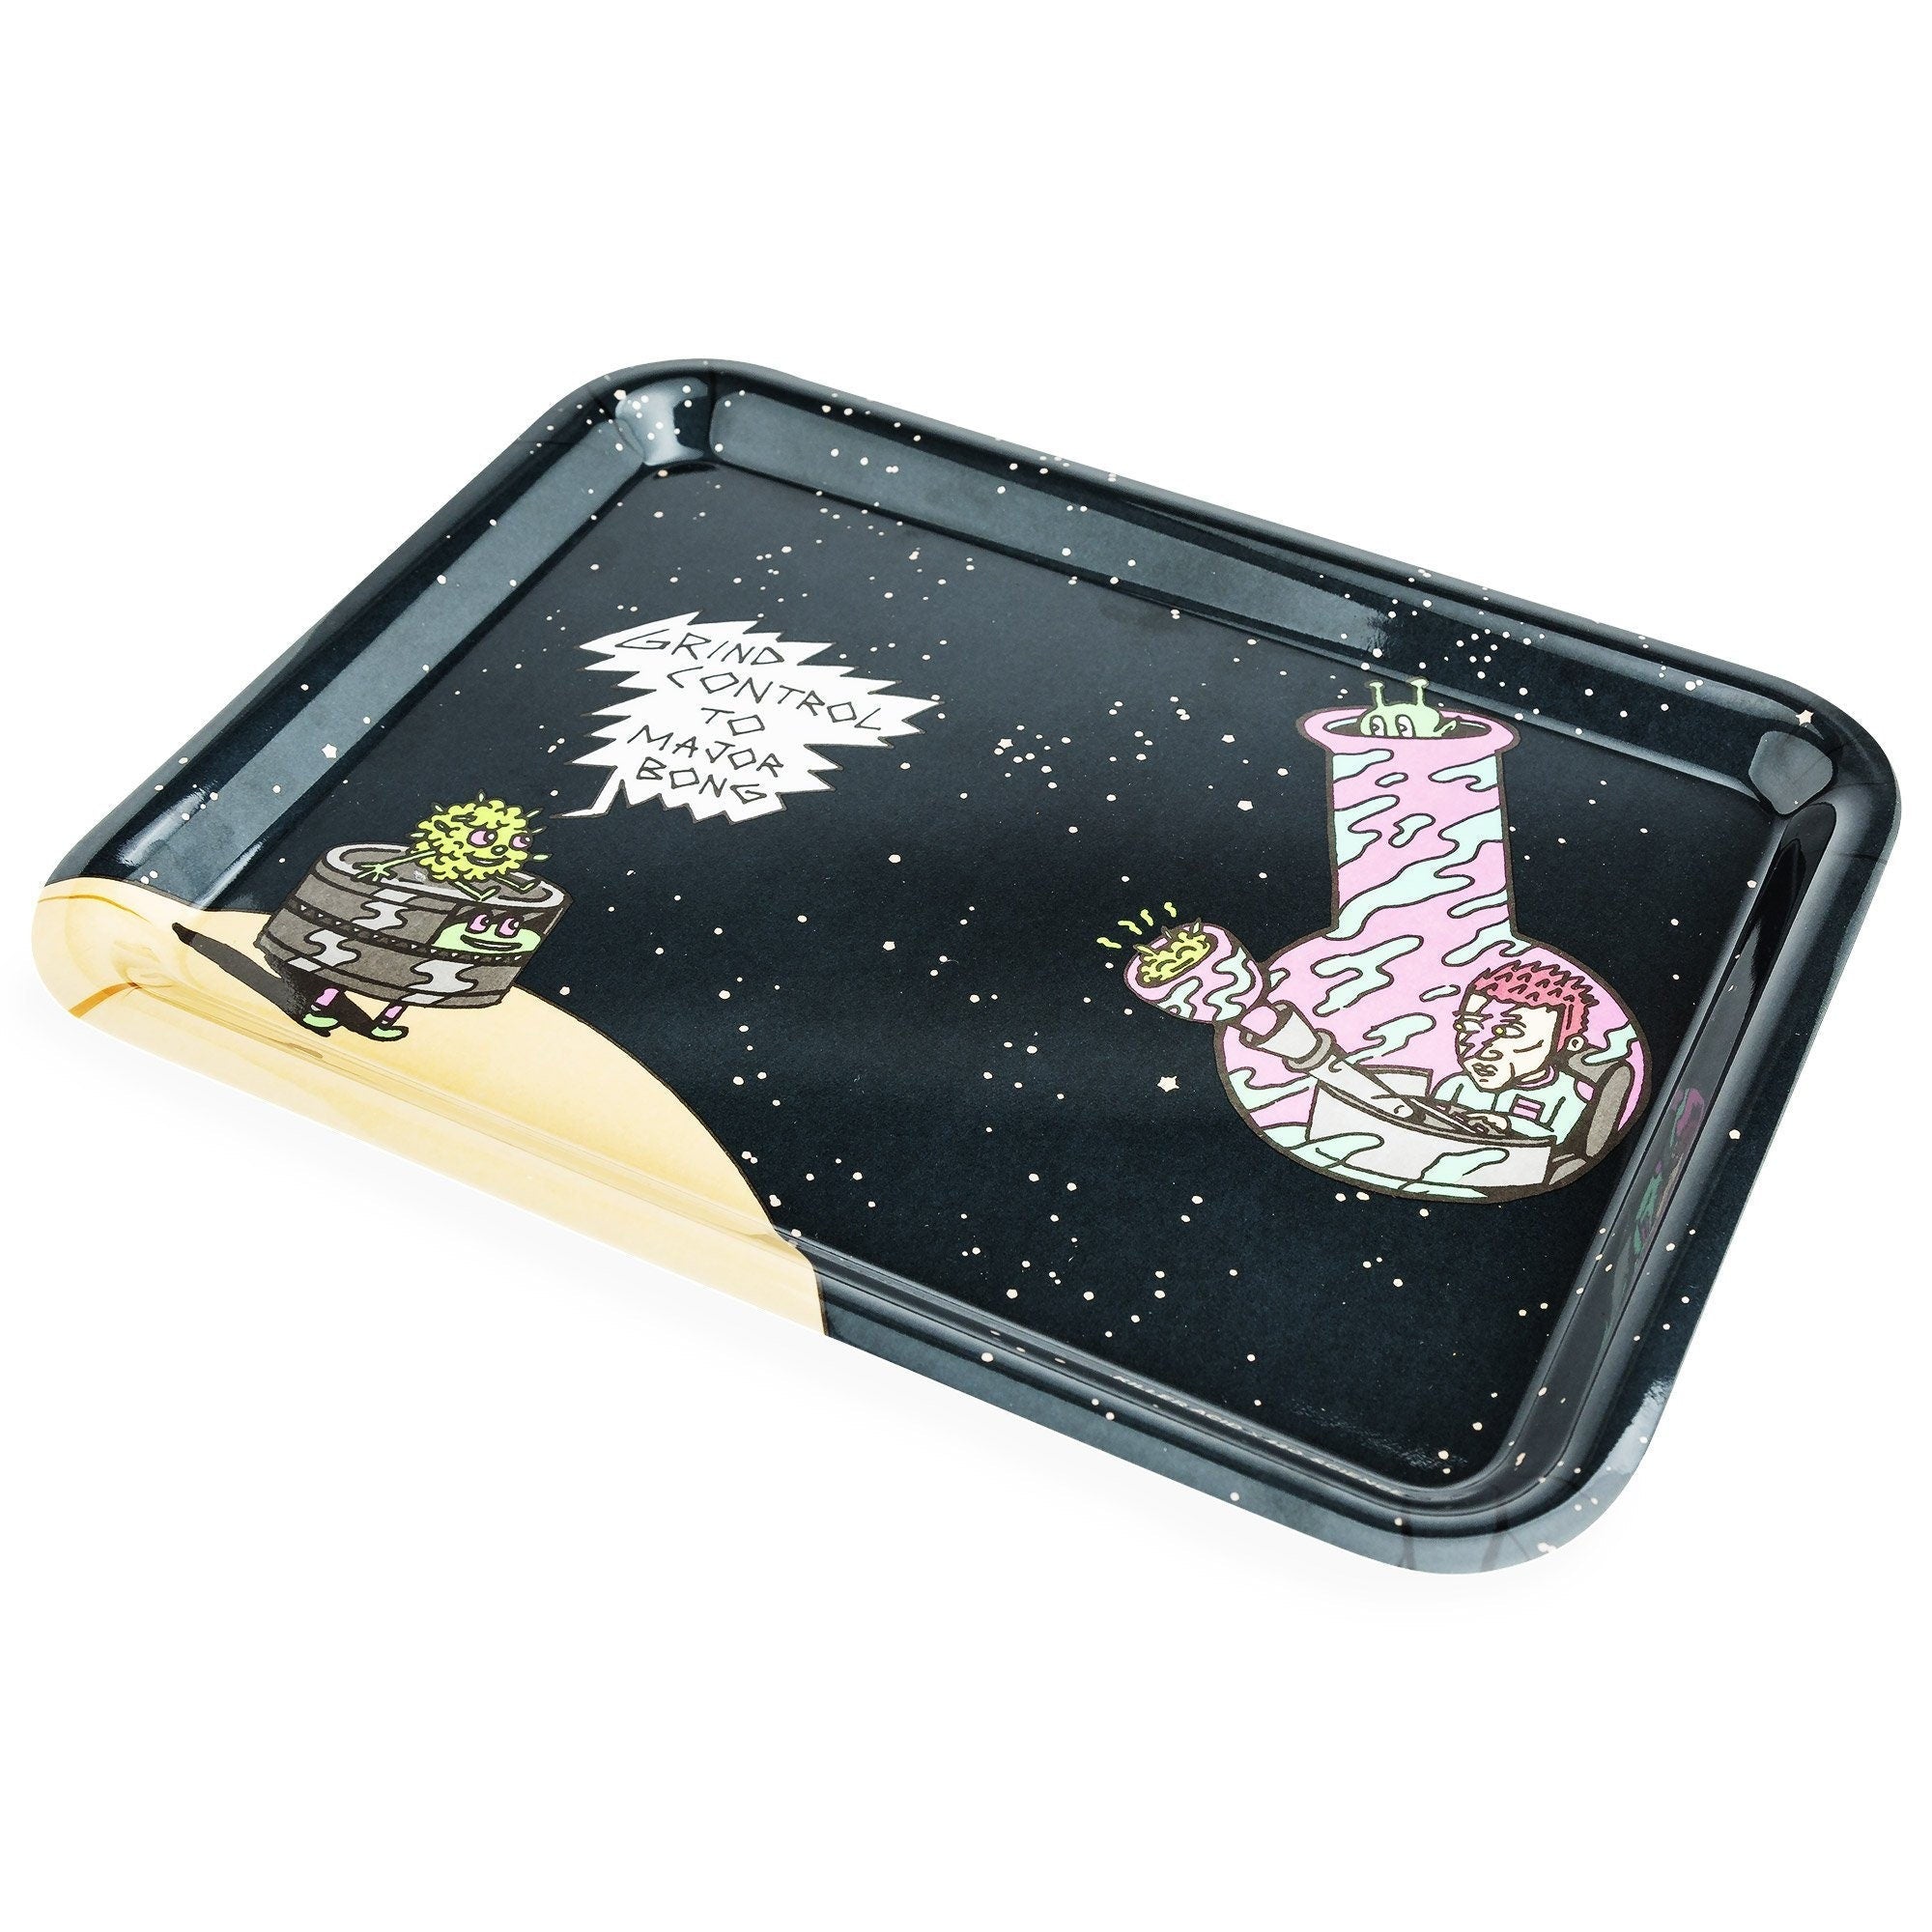 Premium Rolling Tray R & M Space Fight 5'' x 7